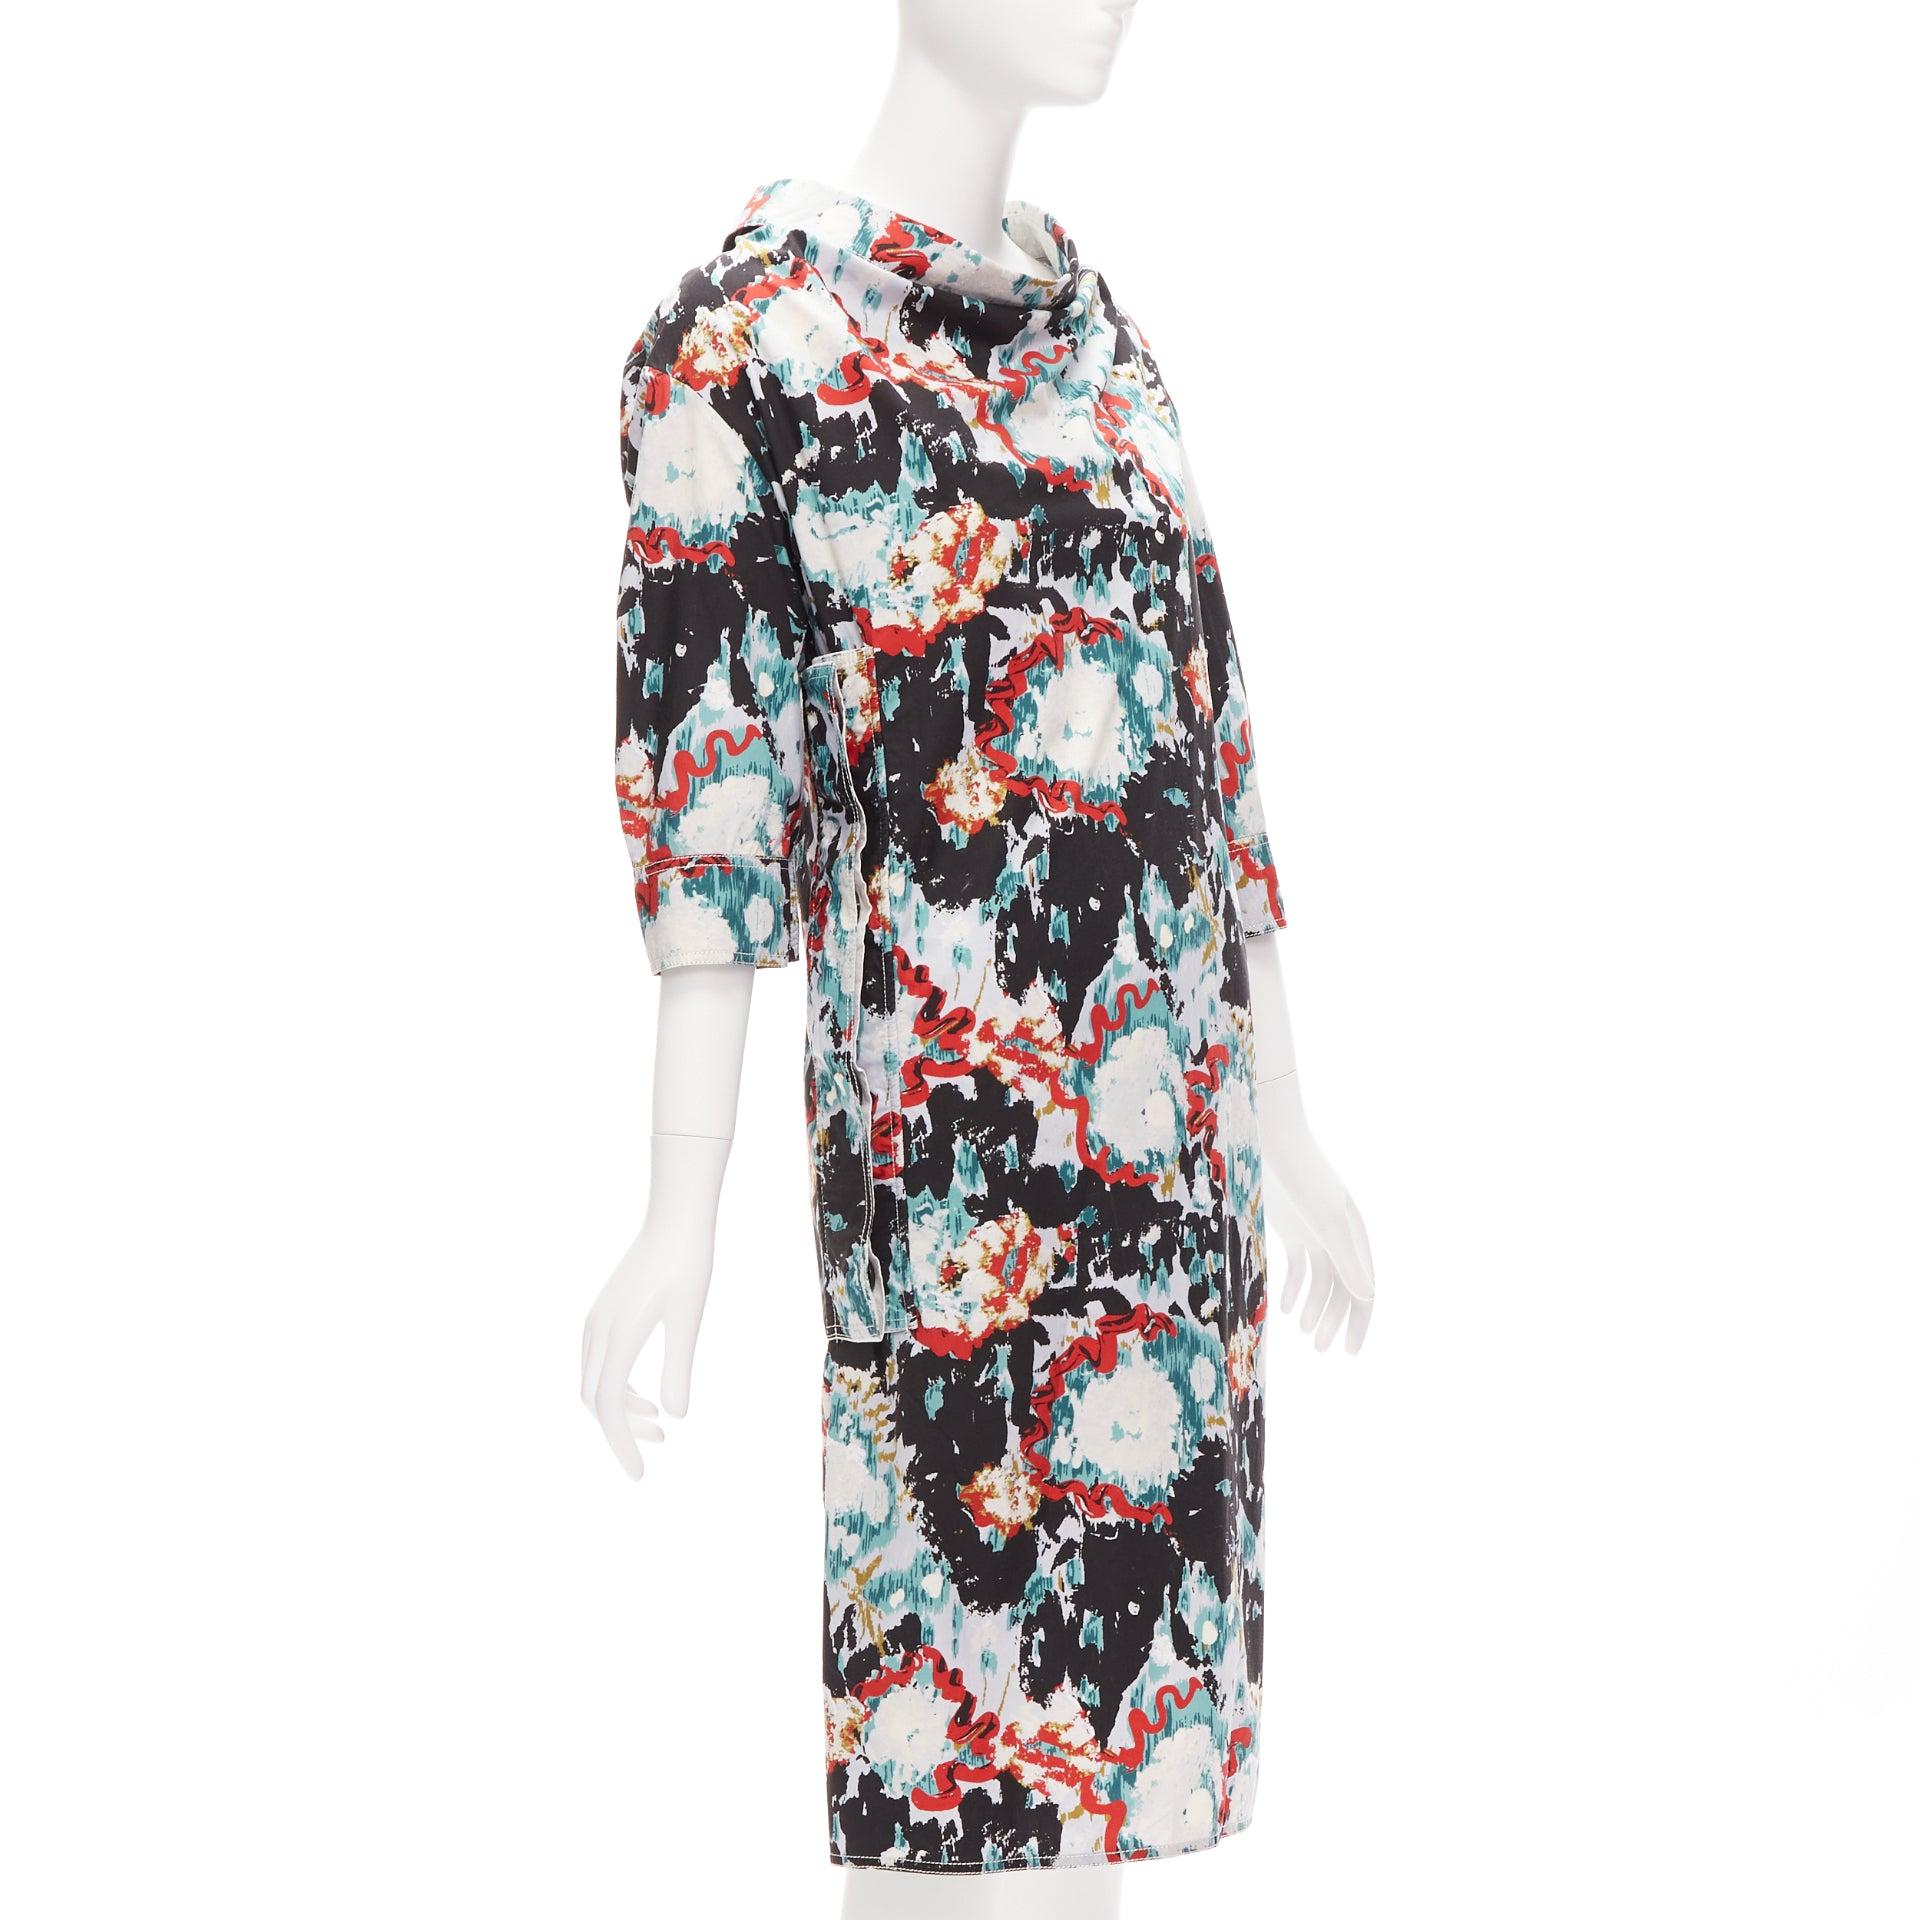 MARNI graphic splash paint print cotton oriental cut dress IT36 XS
Reference: CELG/A00298
Brand: Marni
Material: Cotton
Color: Multicolour
Pattern: Abstract
Closure: Zip
Extra Details: Hidden buttons at right side front.
Made in: